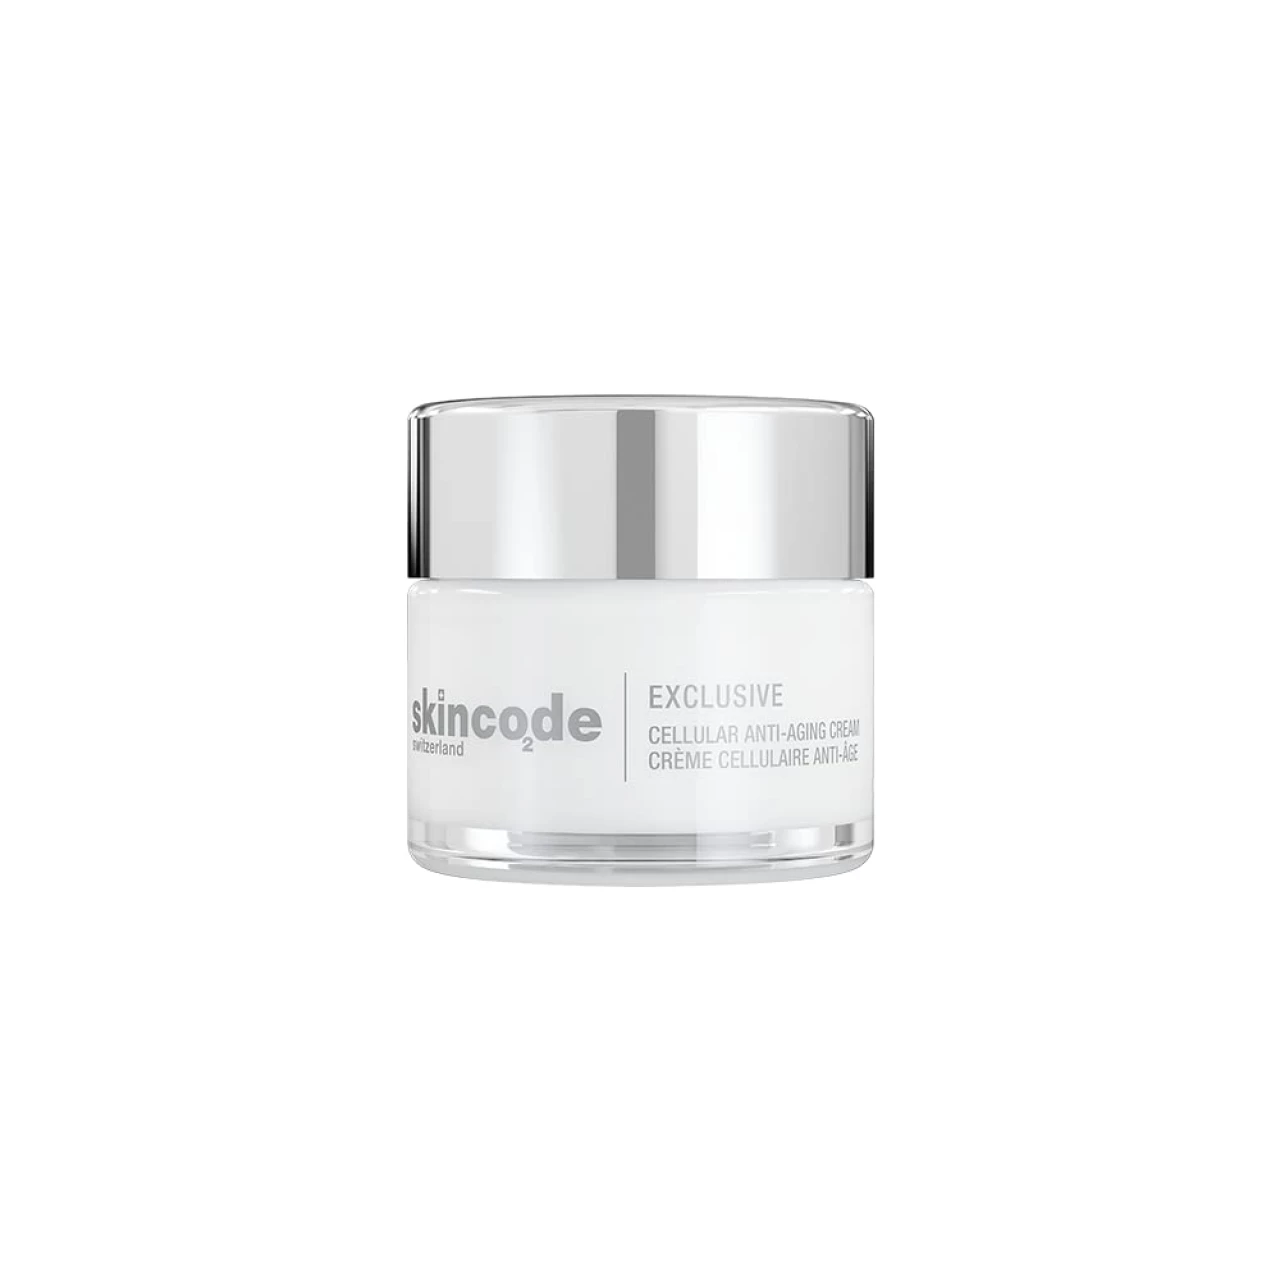 SKINCODE Exclusive Cellular Anti-Aging Cream - Nighttime Facial Moisturizer, Hydrating &amp; Firming